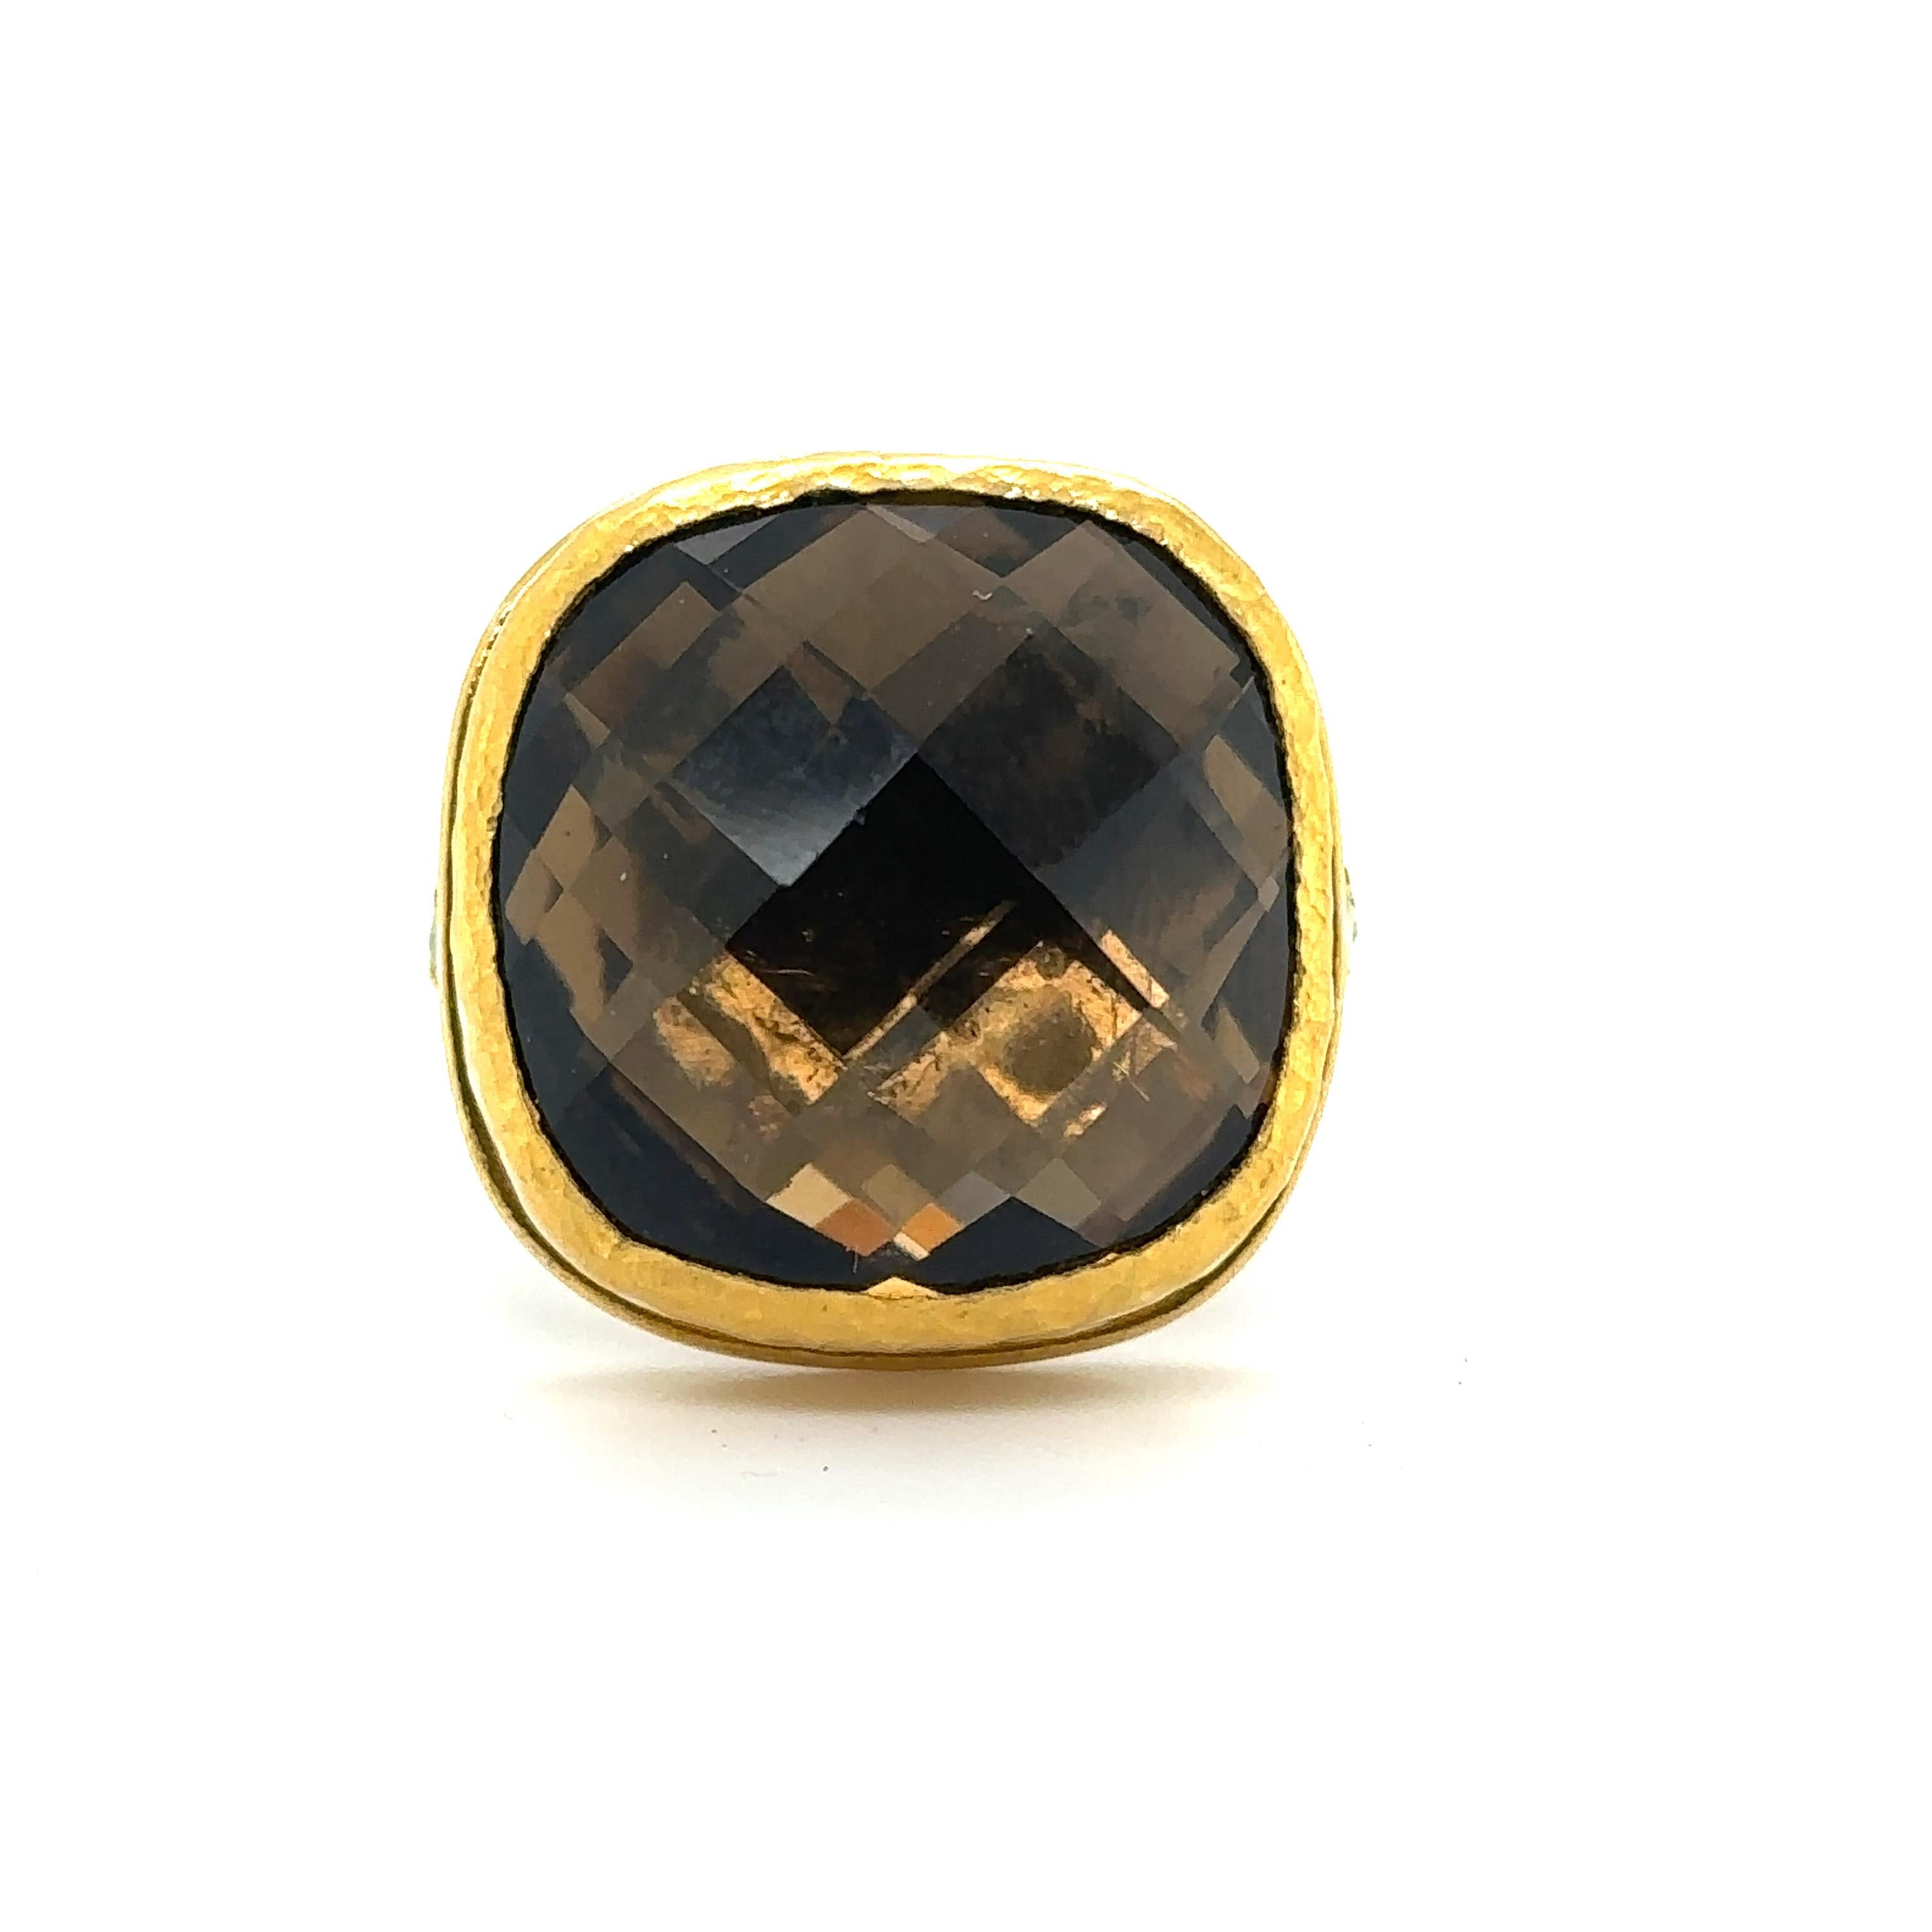 JAS-19-1993-24KT GOLD/SS with CUSHION CUT SMOKY QUARTZ & CHROME DIOPSIDES For Sale 2